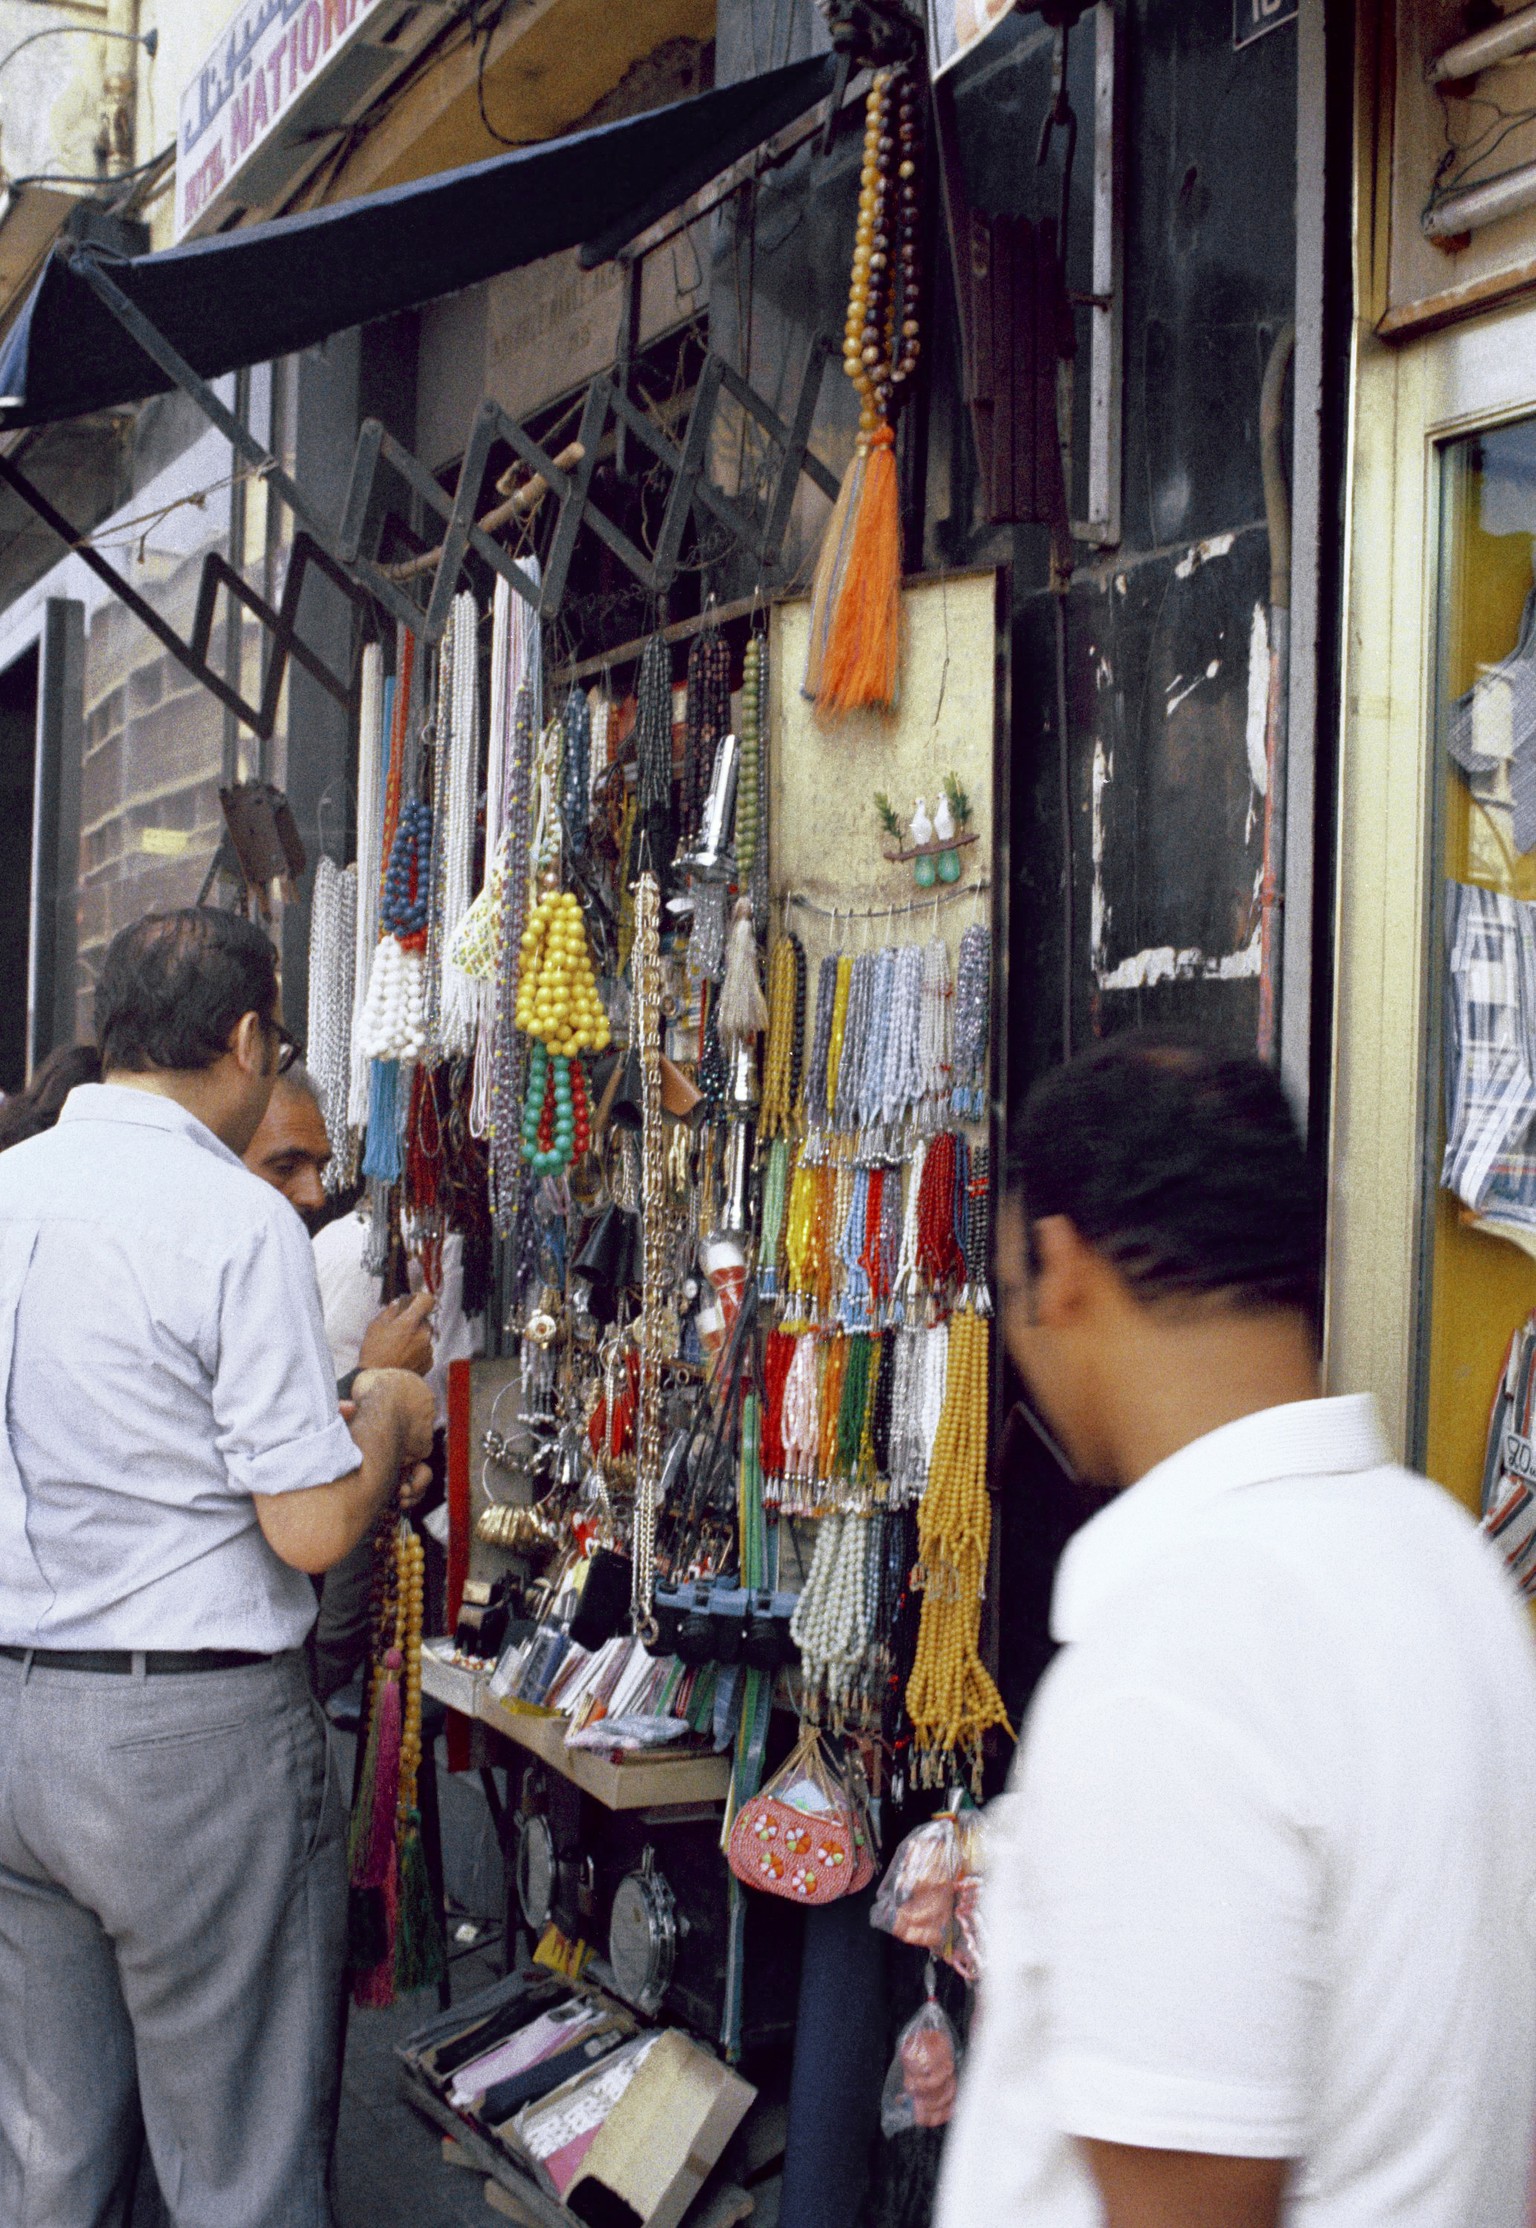 Souvenir seller Hussein Badir, a seller of worry beads, is worried as the sales of his beads are dwindling in Beirut, Lebanon on Sept. 13, 1974. People do not worry enough, he says. (AP Photo/Aly Ma ...